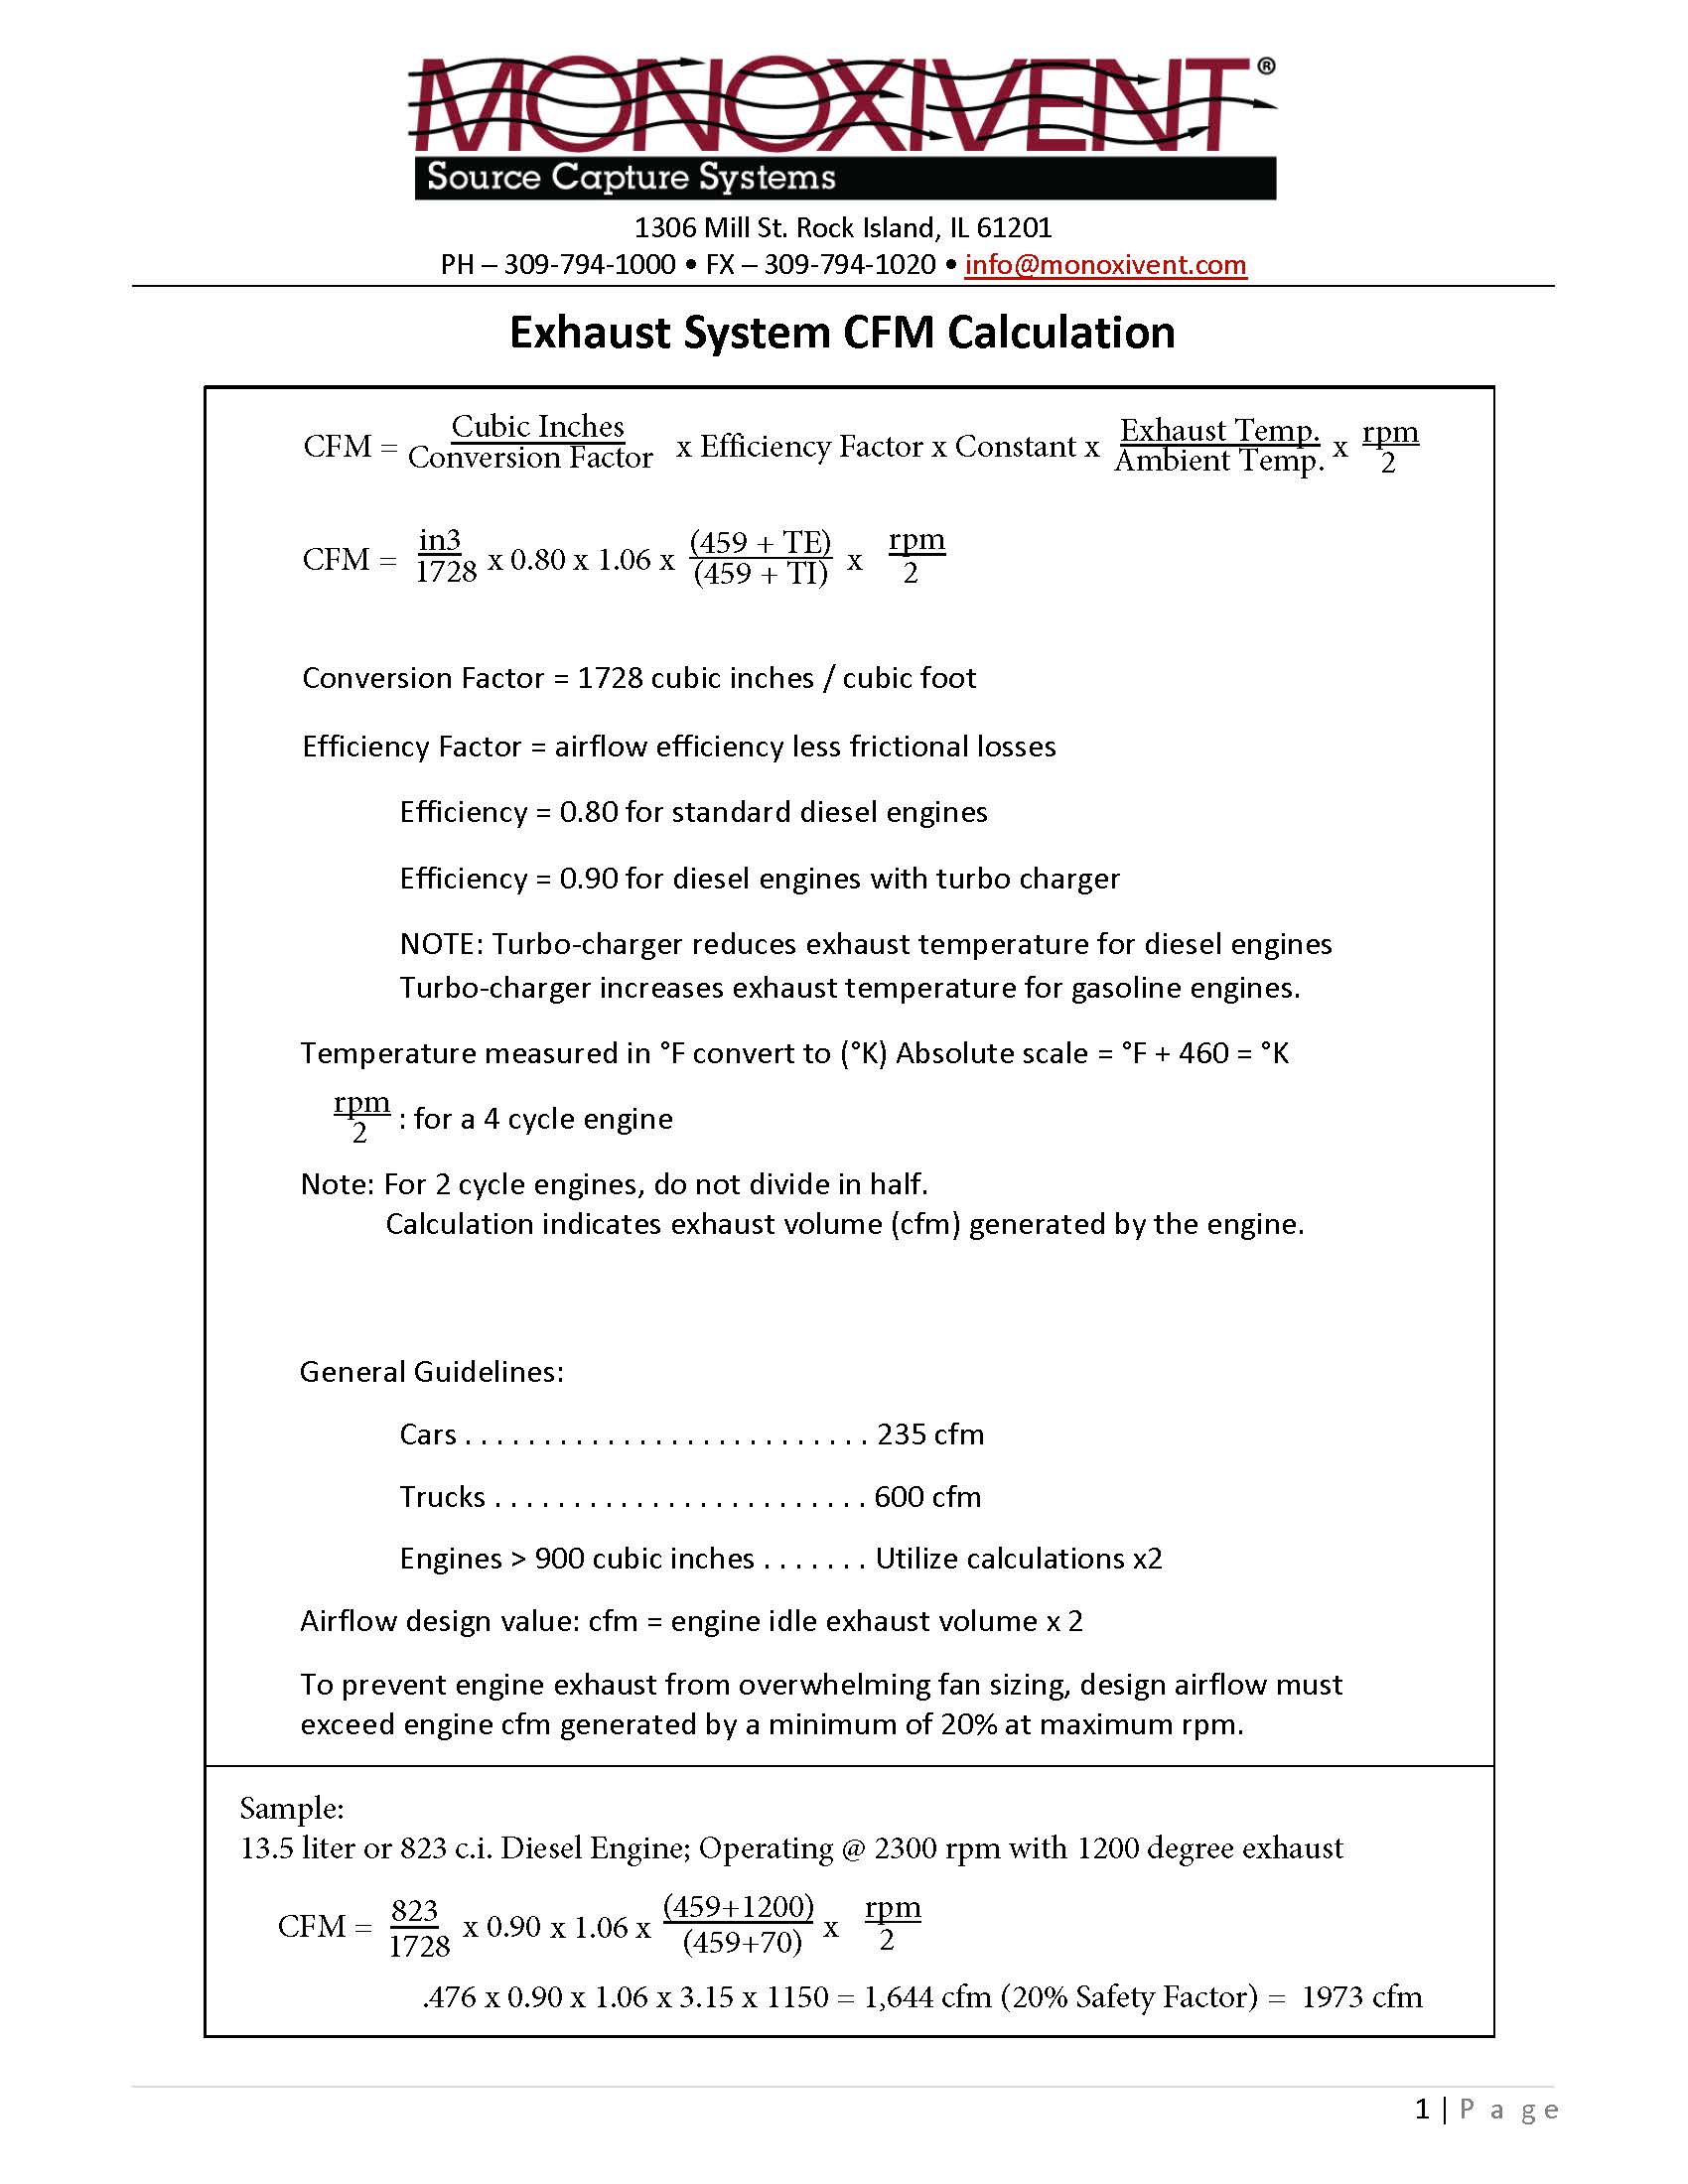 Exhaust System CFM Calculation